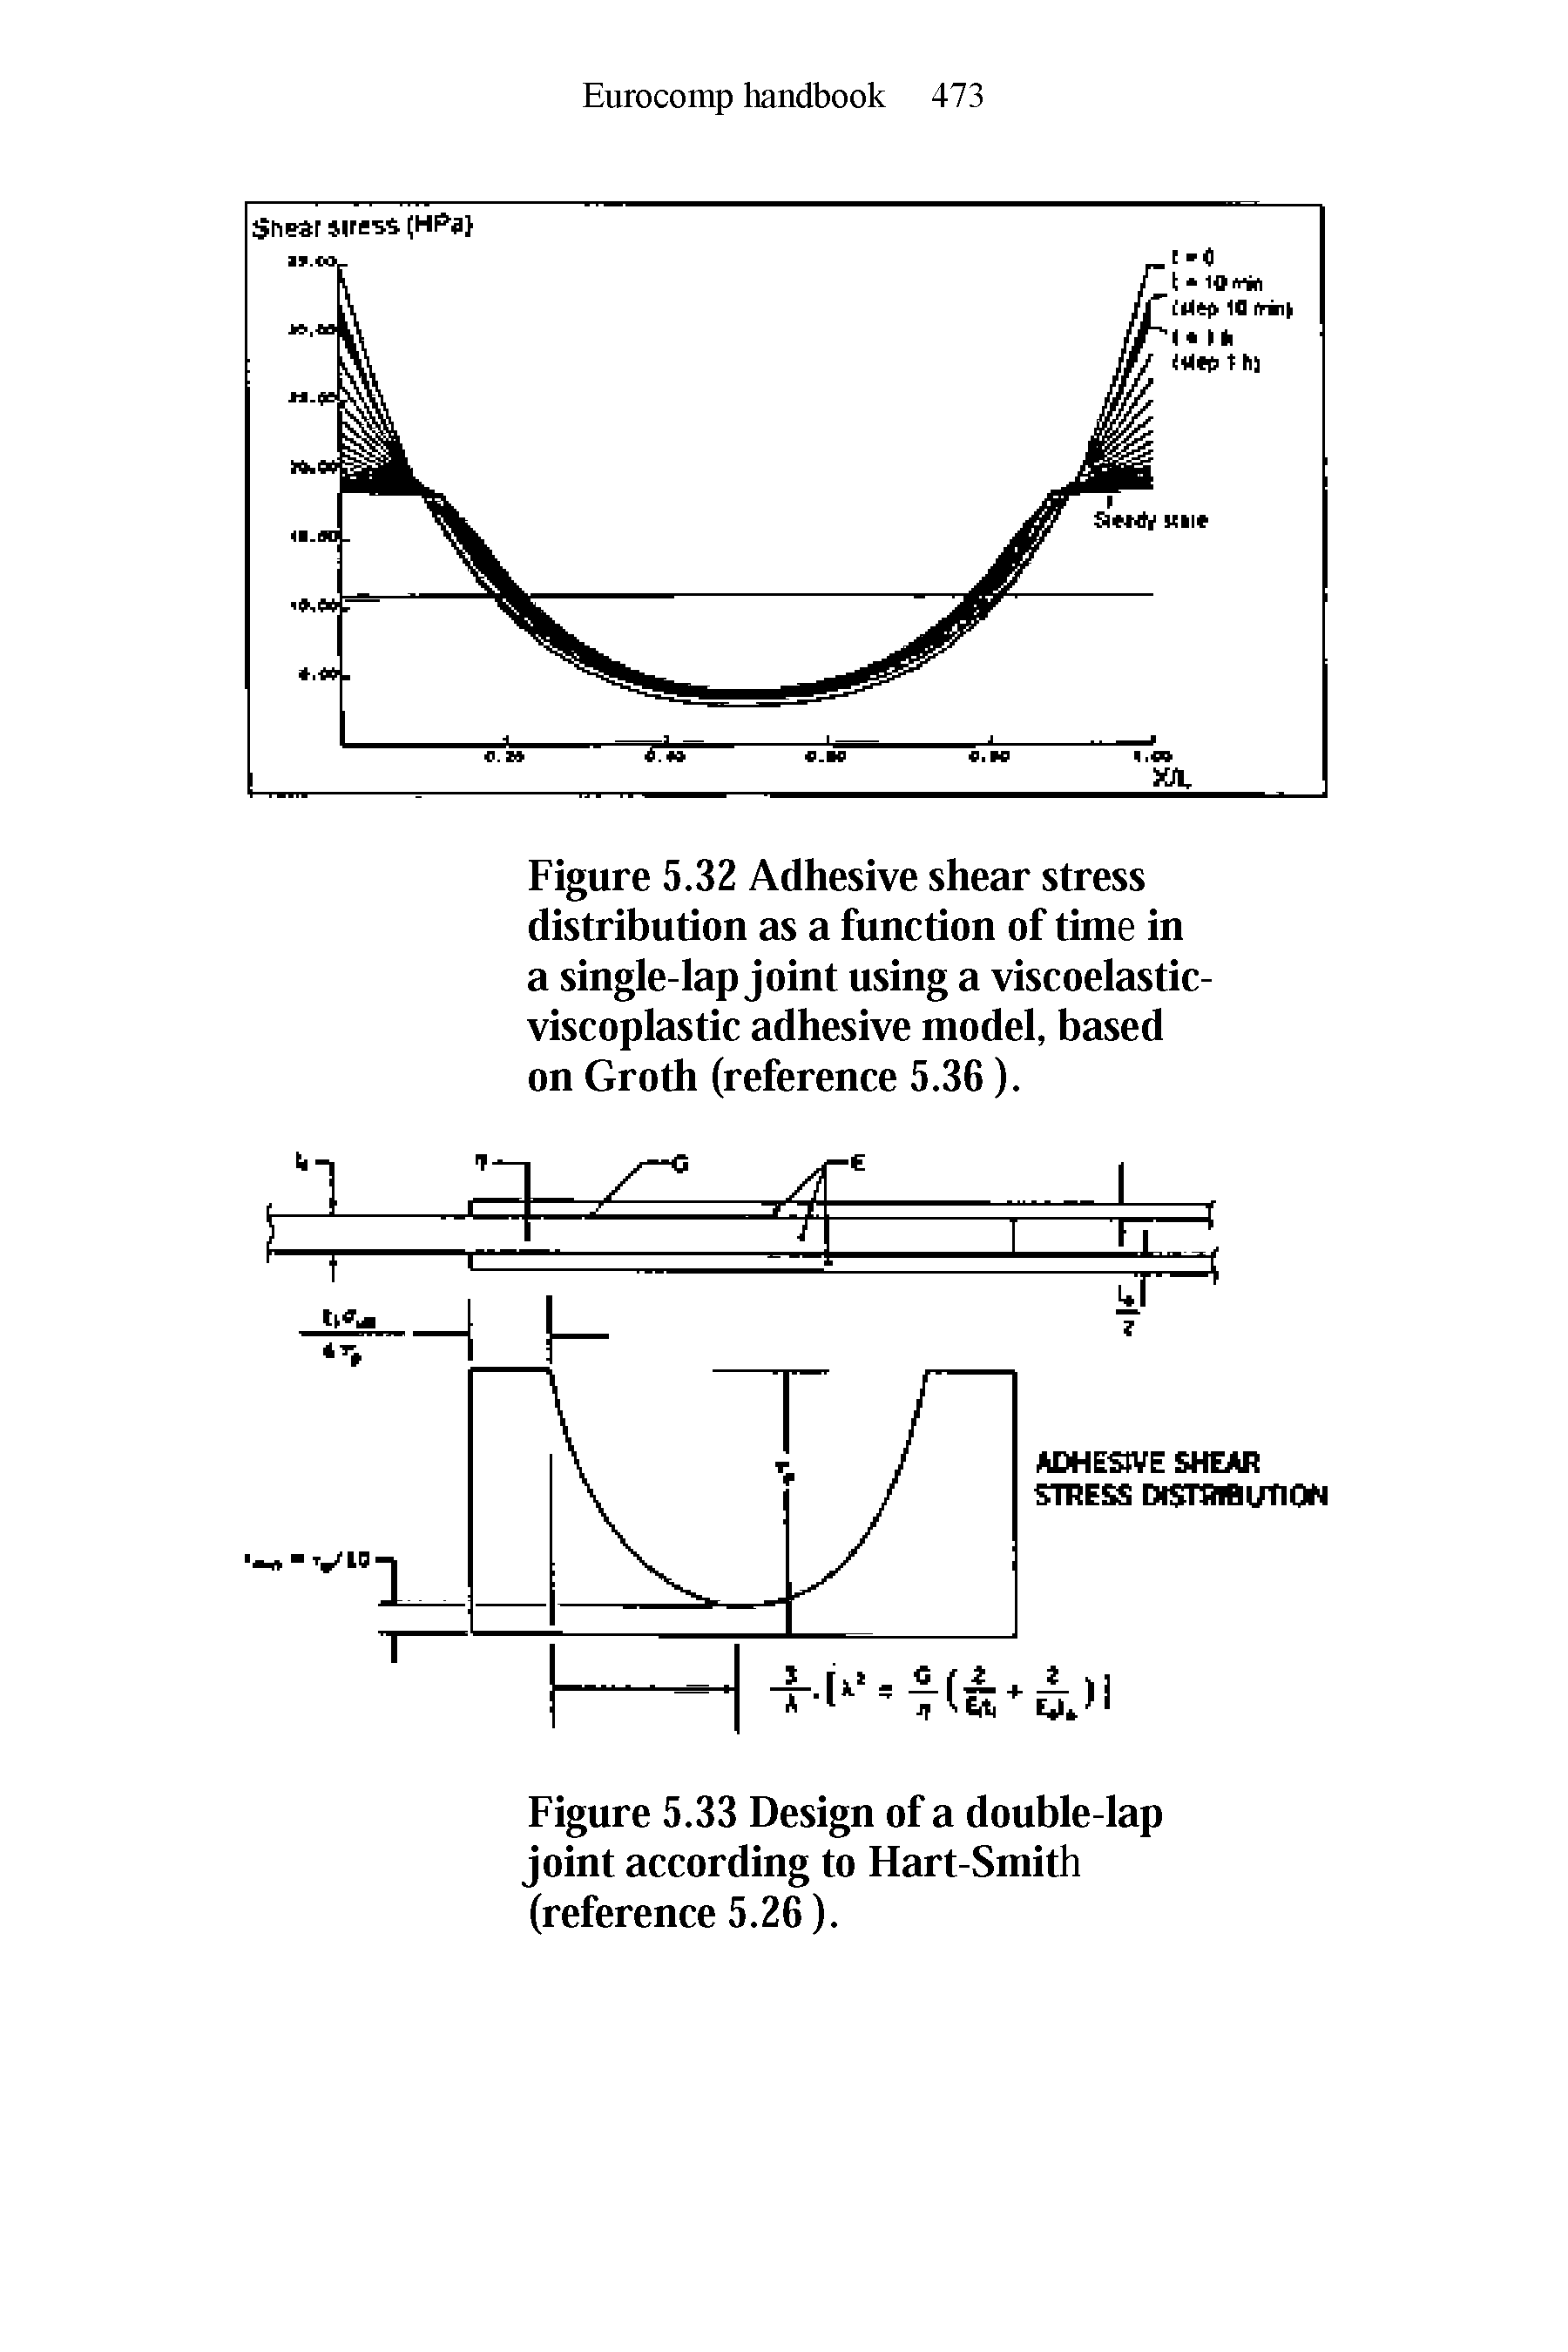 Figure 5.33 Design of a double-lap joint according to Hart-Smith (reference 5.26).